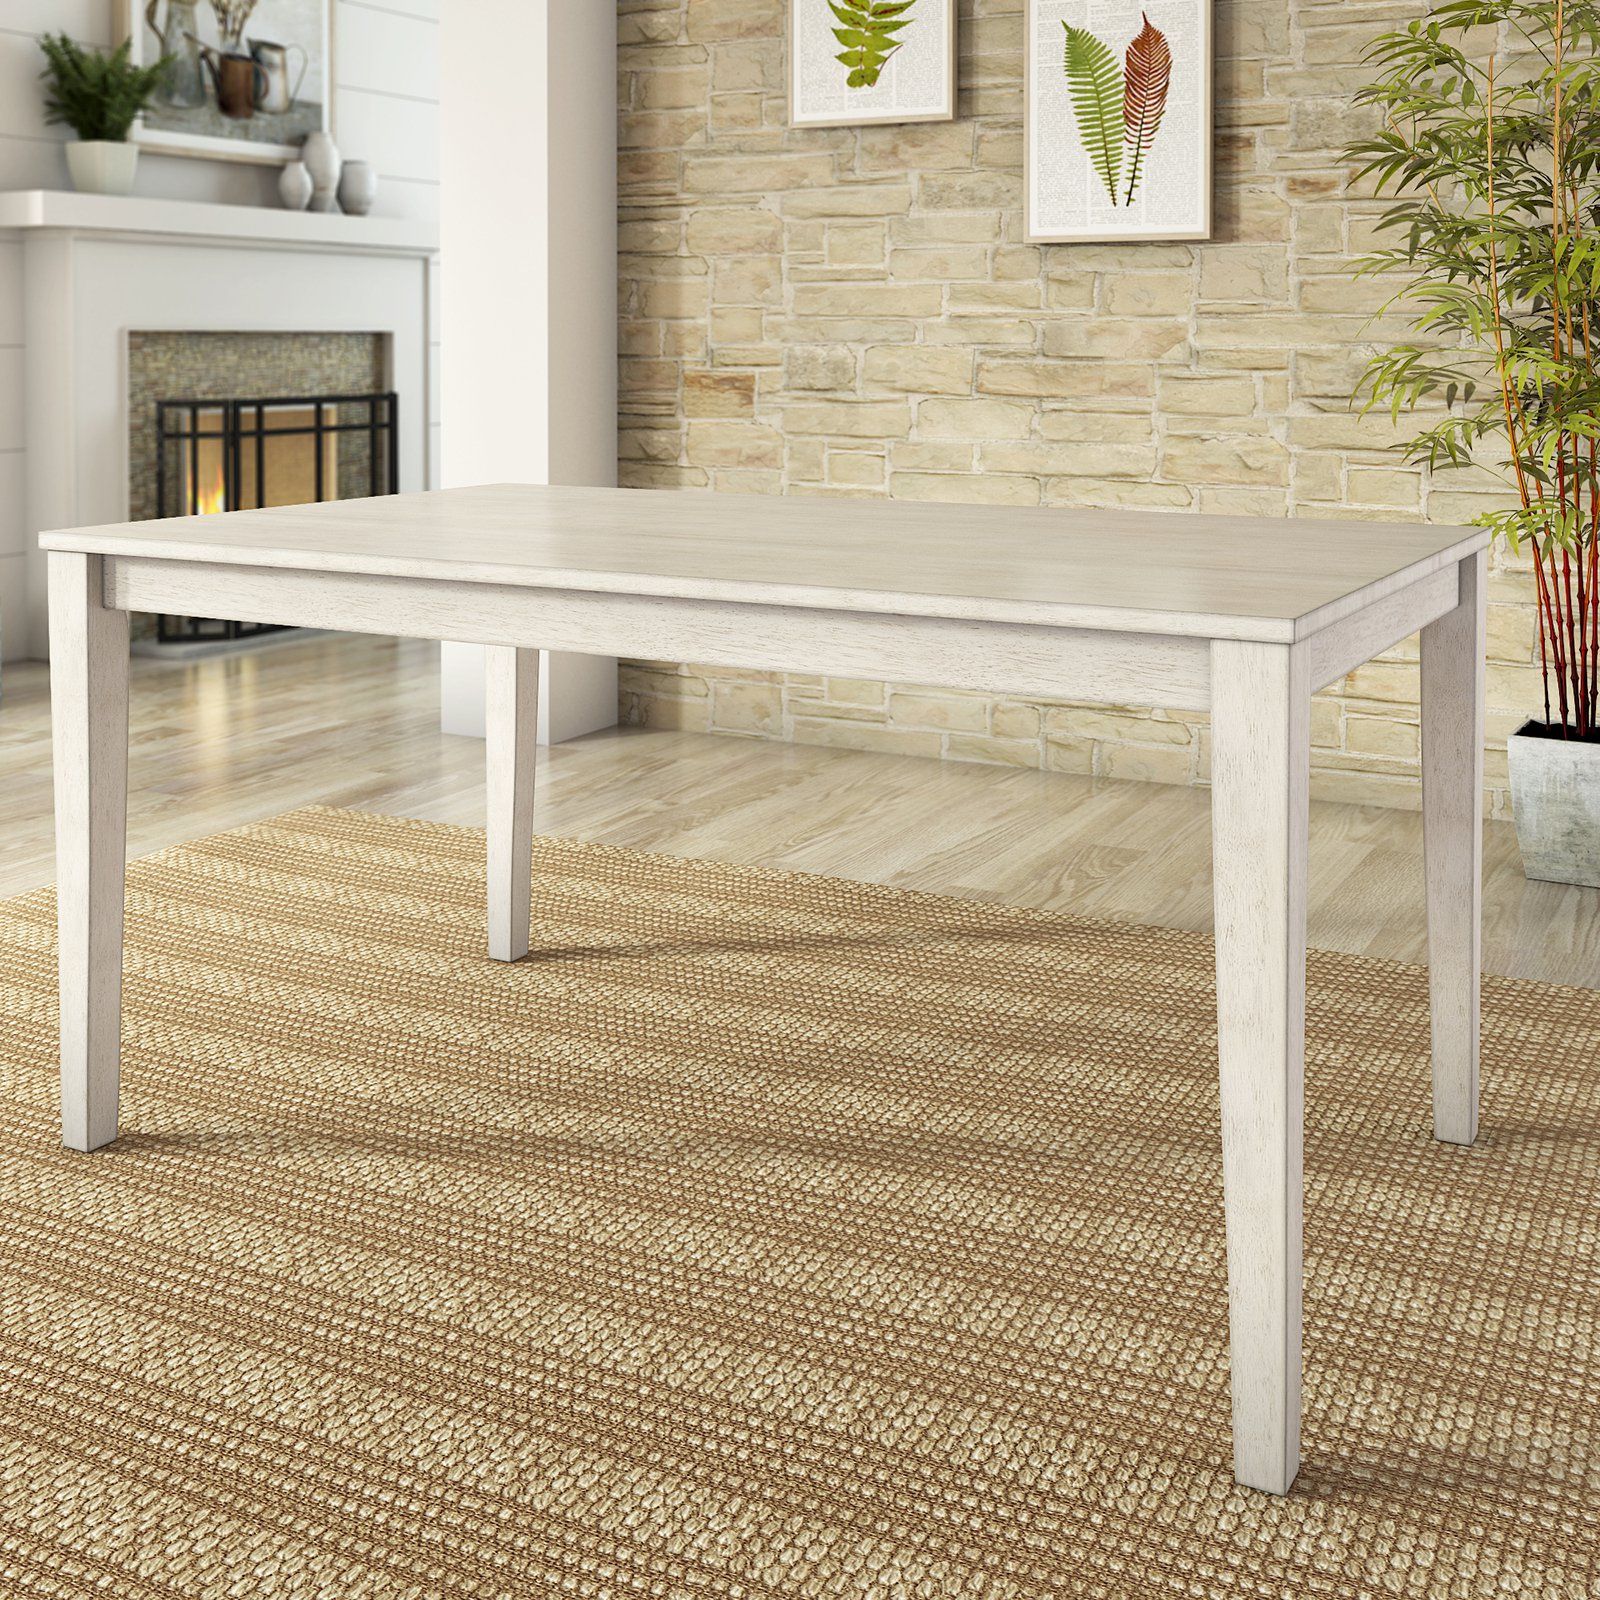 Lexington Large 60" Wood Dining Table, White – Walmart For Fashionable Nazan 46'' Dining Tables (View 5 of 20)